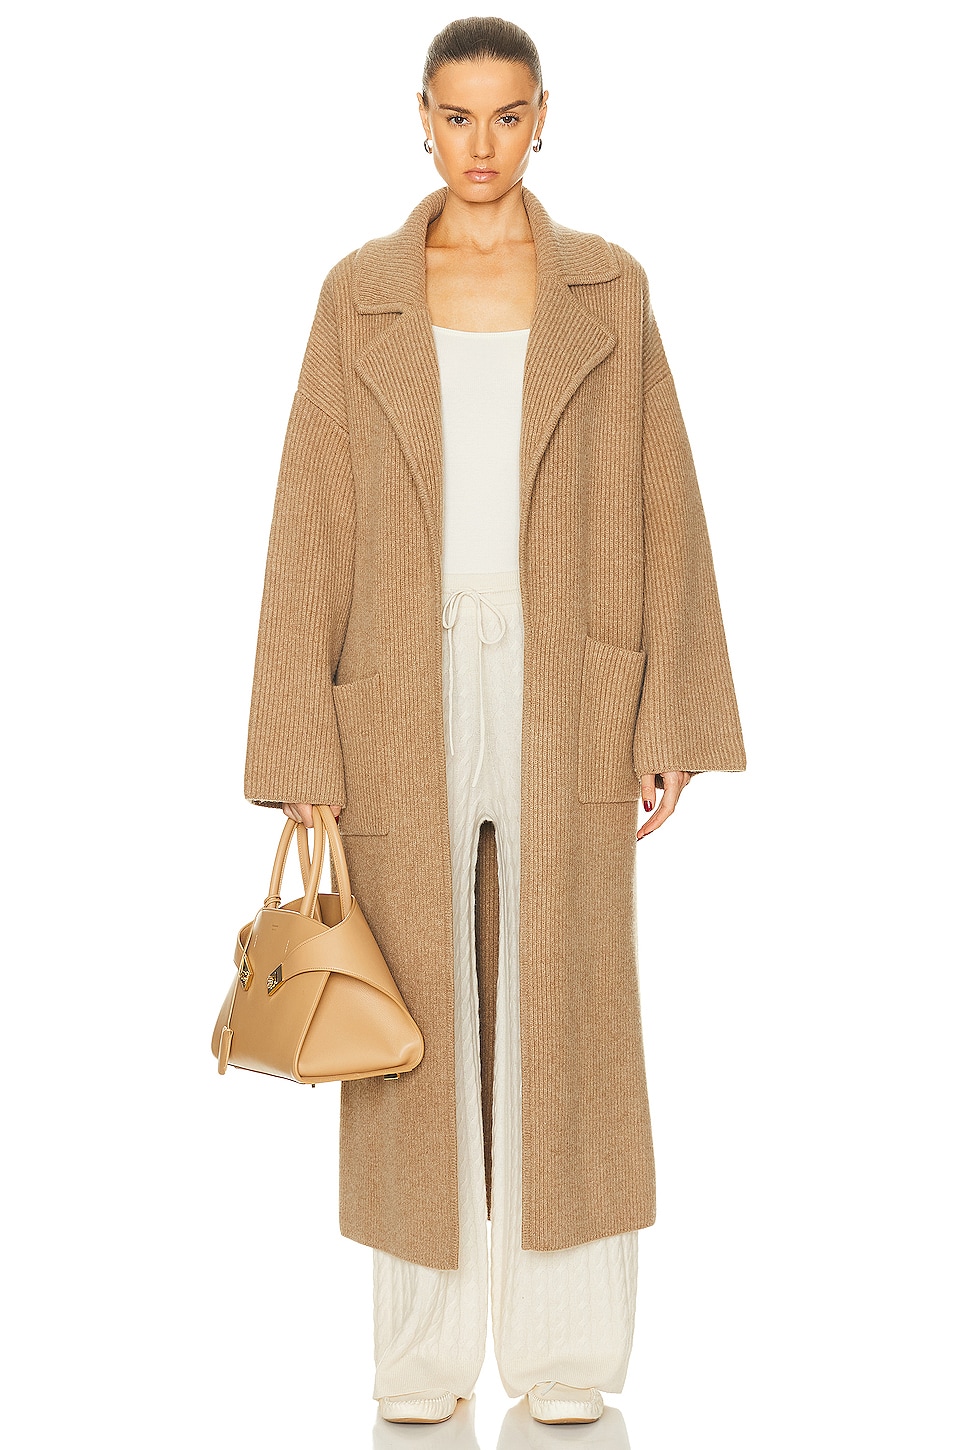 Image 1 of Toteme Rib Knit Cardi Coat in Biscuit